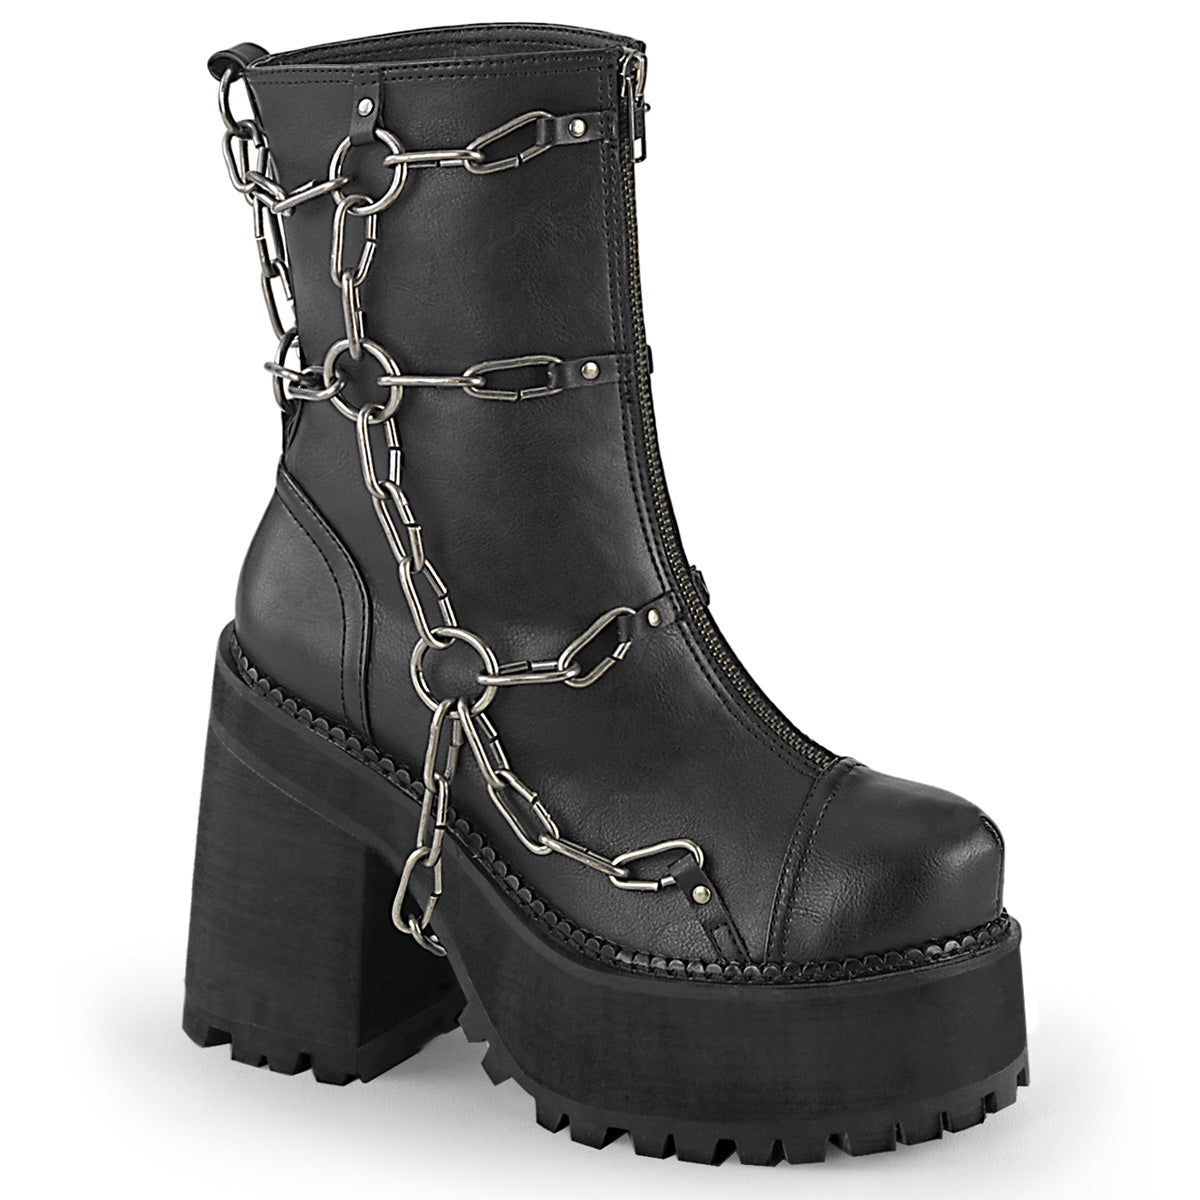 Chain of Domination Boots